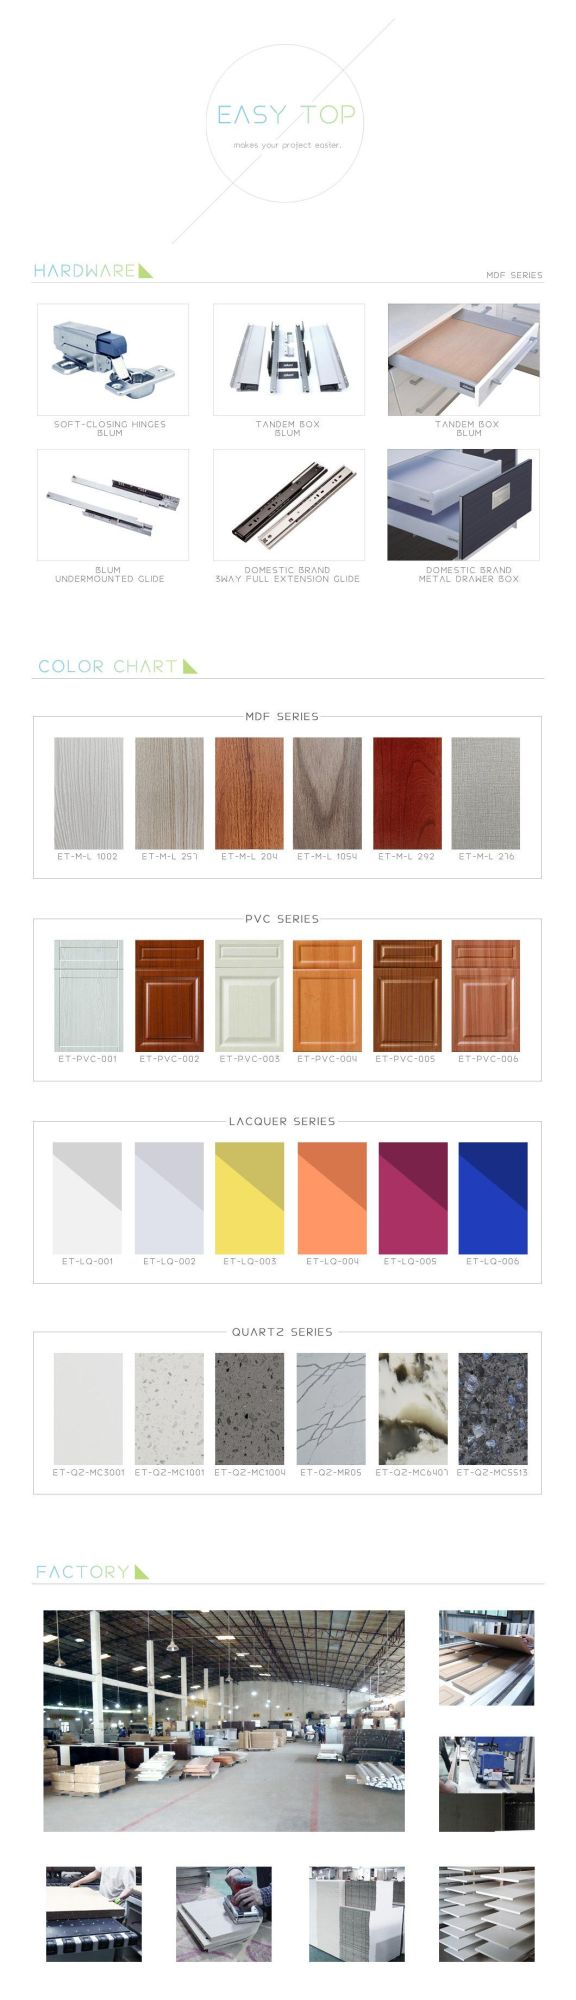 L-Shaped Anti-Scratch Laminate Paper White Shaker Joinery MDF Hot Sale Kitchen Cabinets Korean